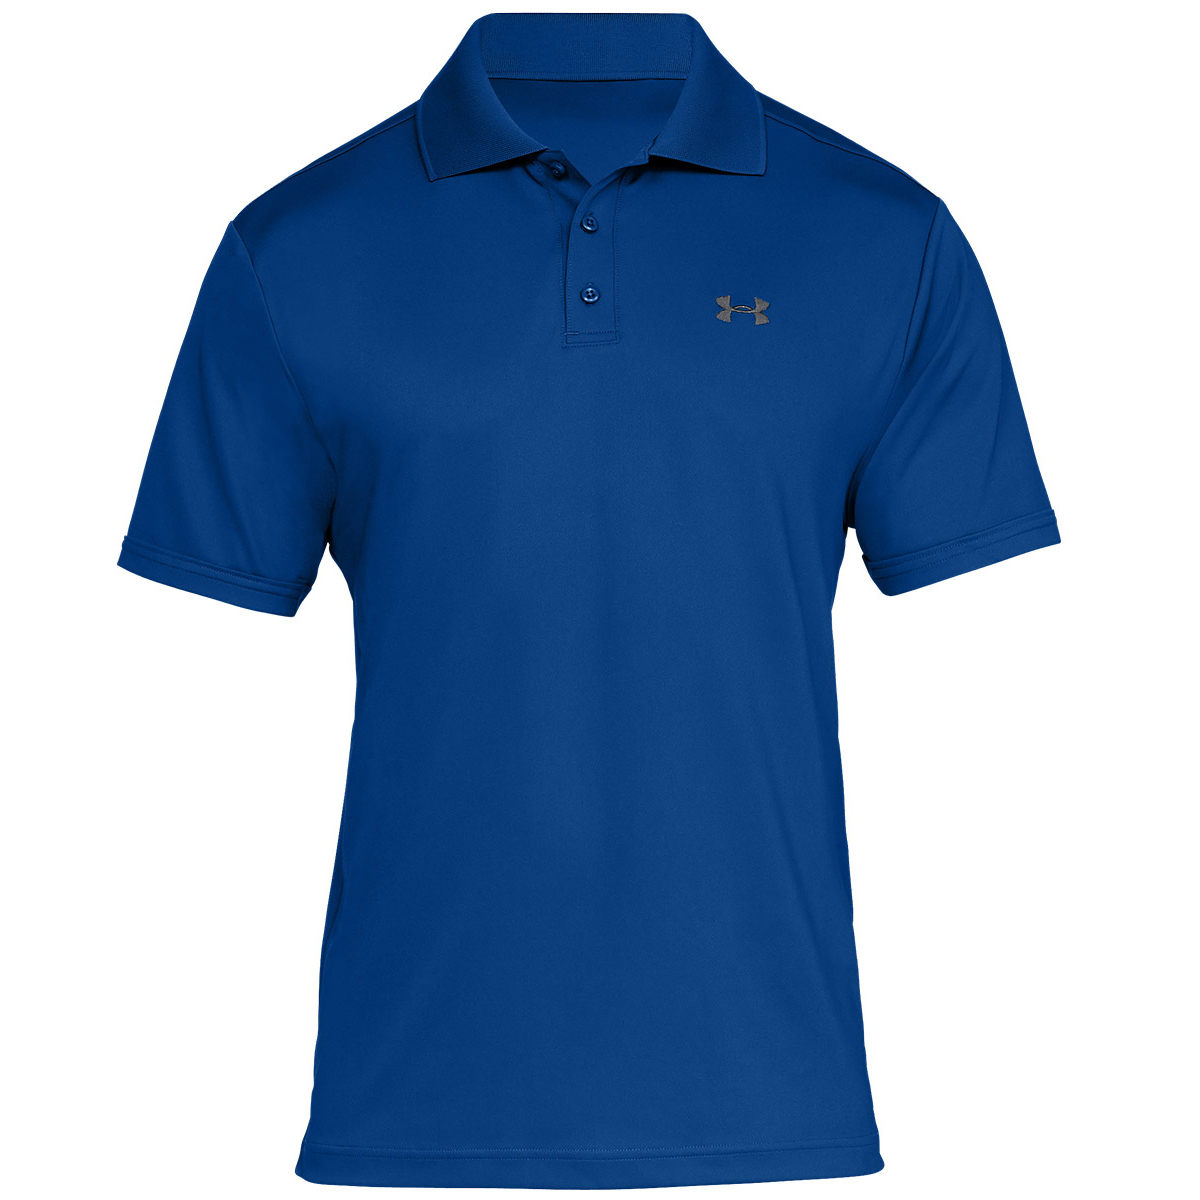 Under Armour Performance Polo Shirt from american golf